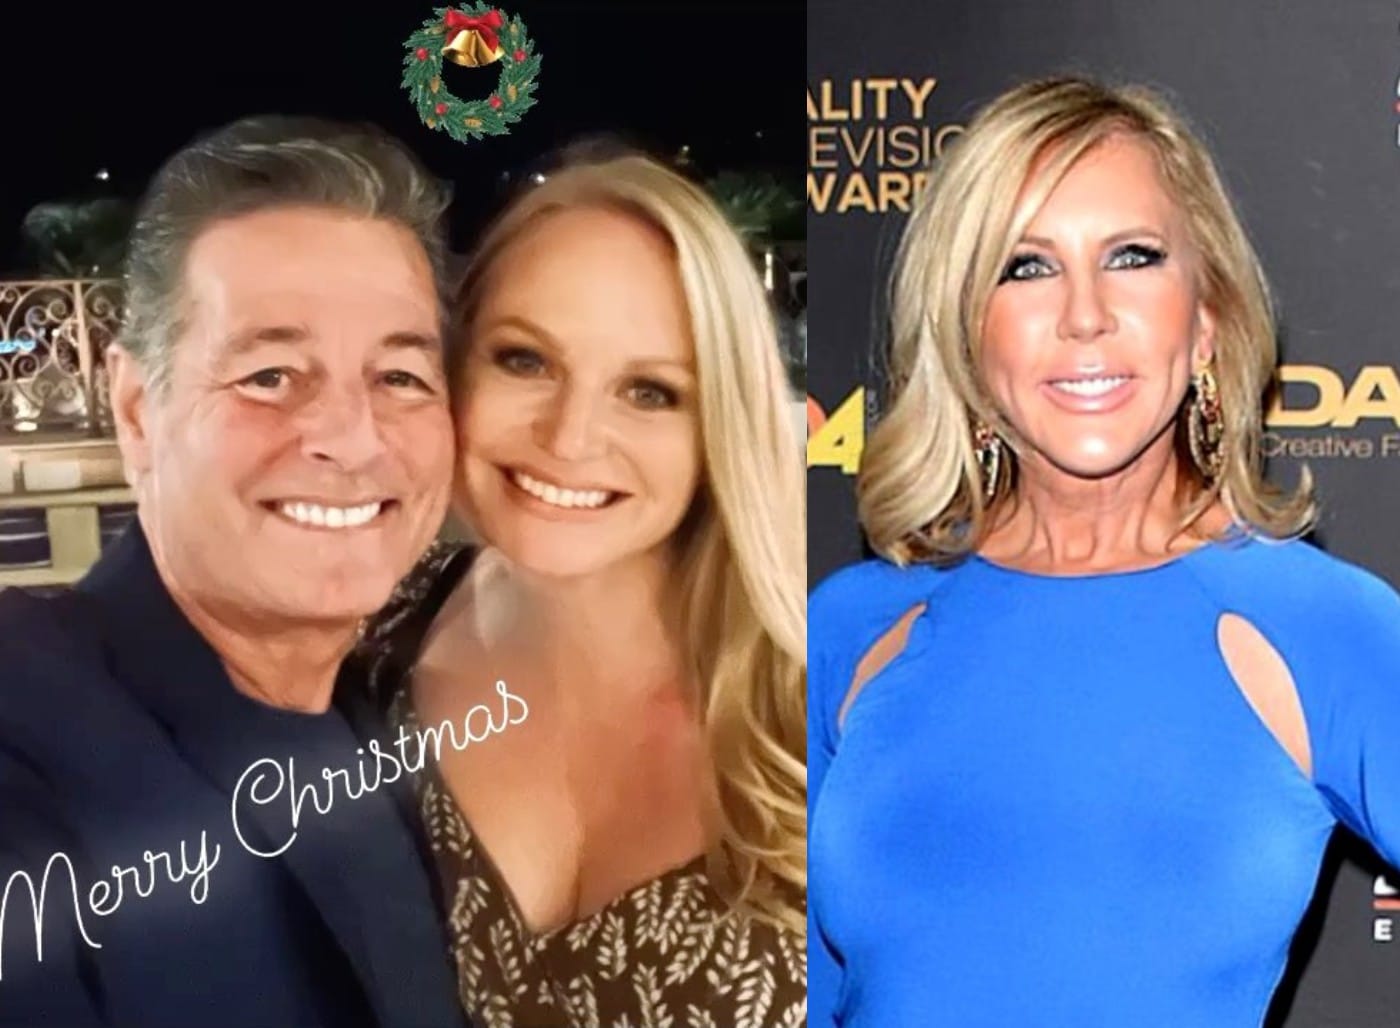 Steve Lodge, 63, has a new fiancé, Janis Carlson, 37, just months after breaking up with RHOC alum Vicki Gunvalson